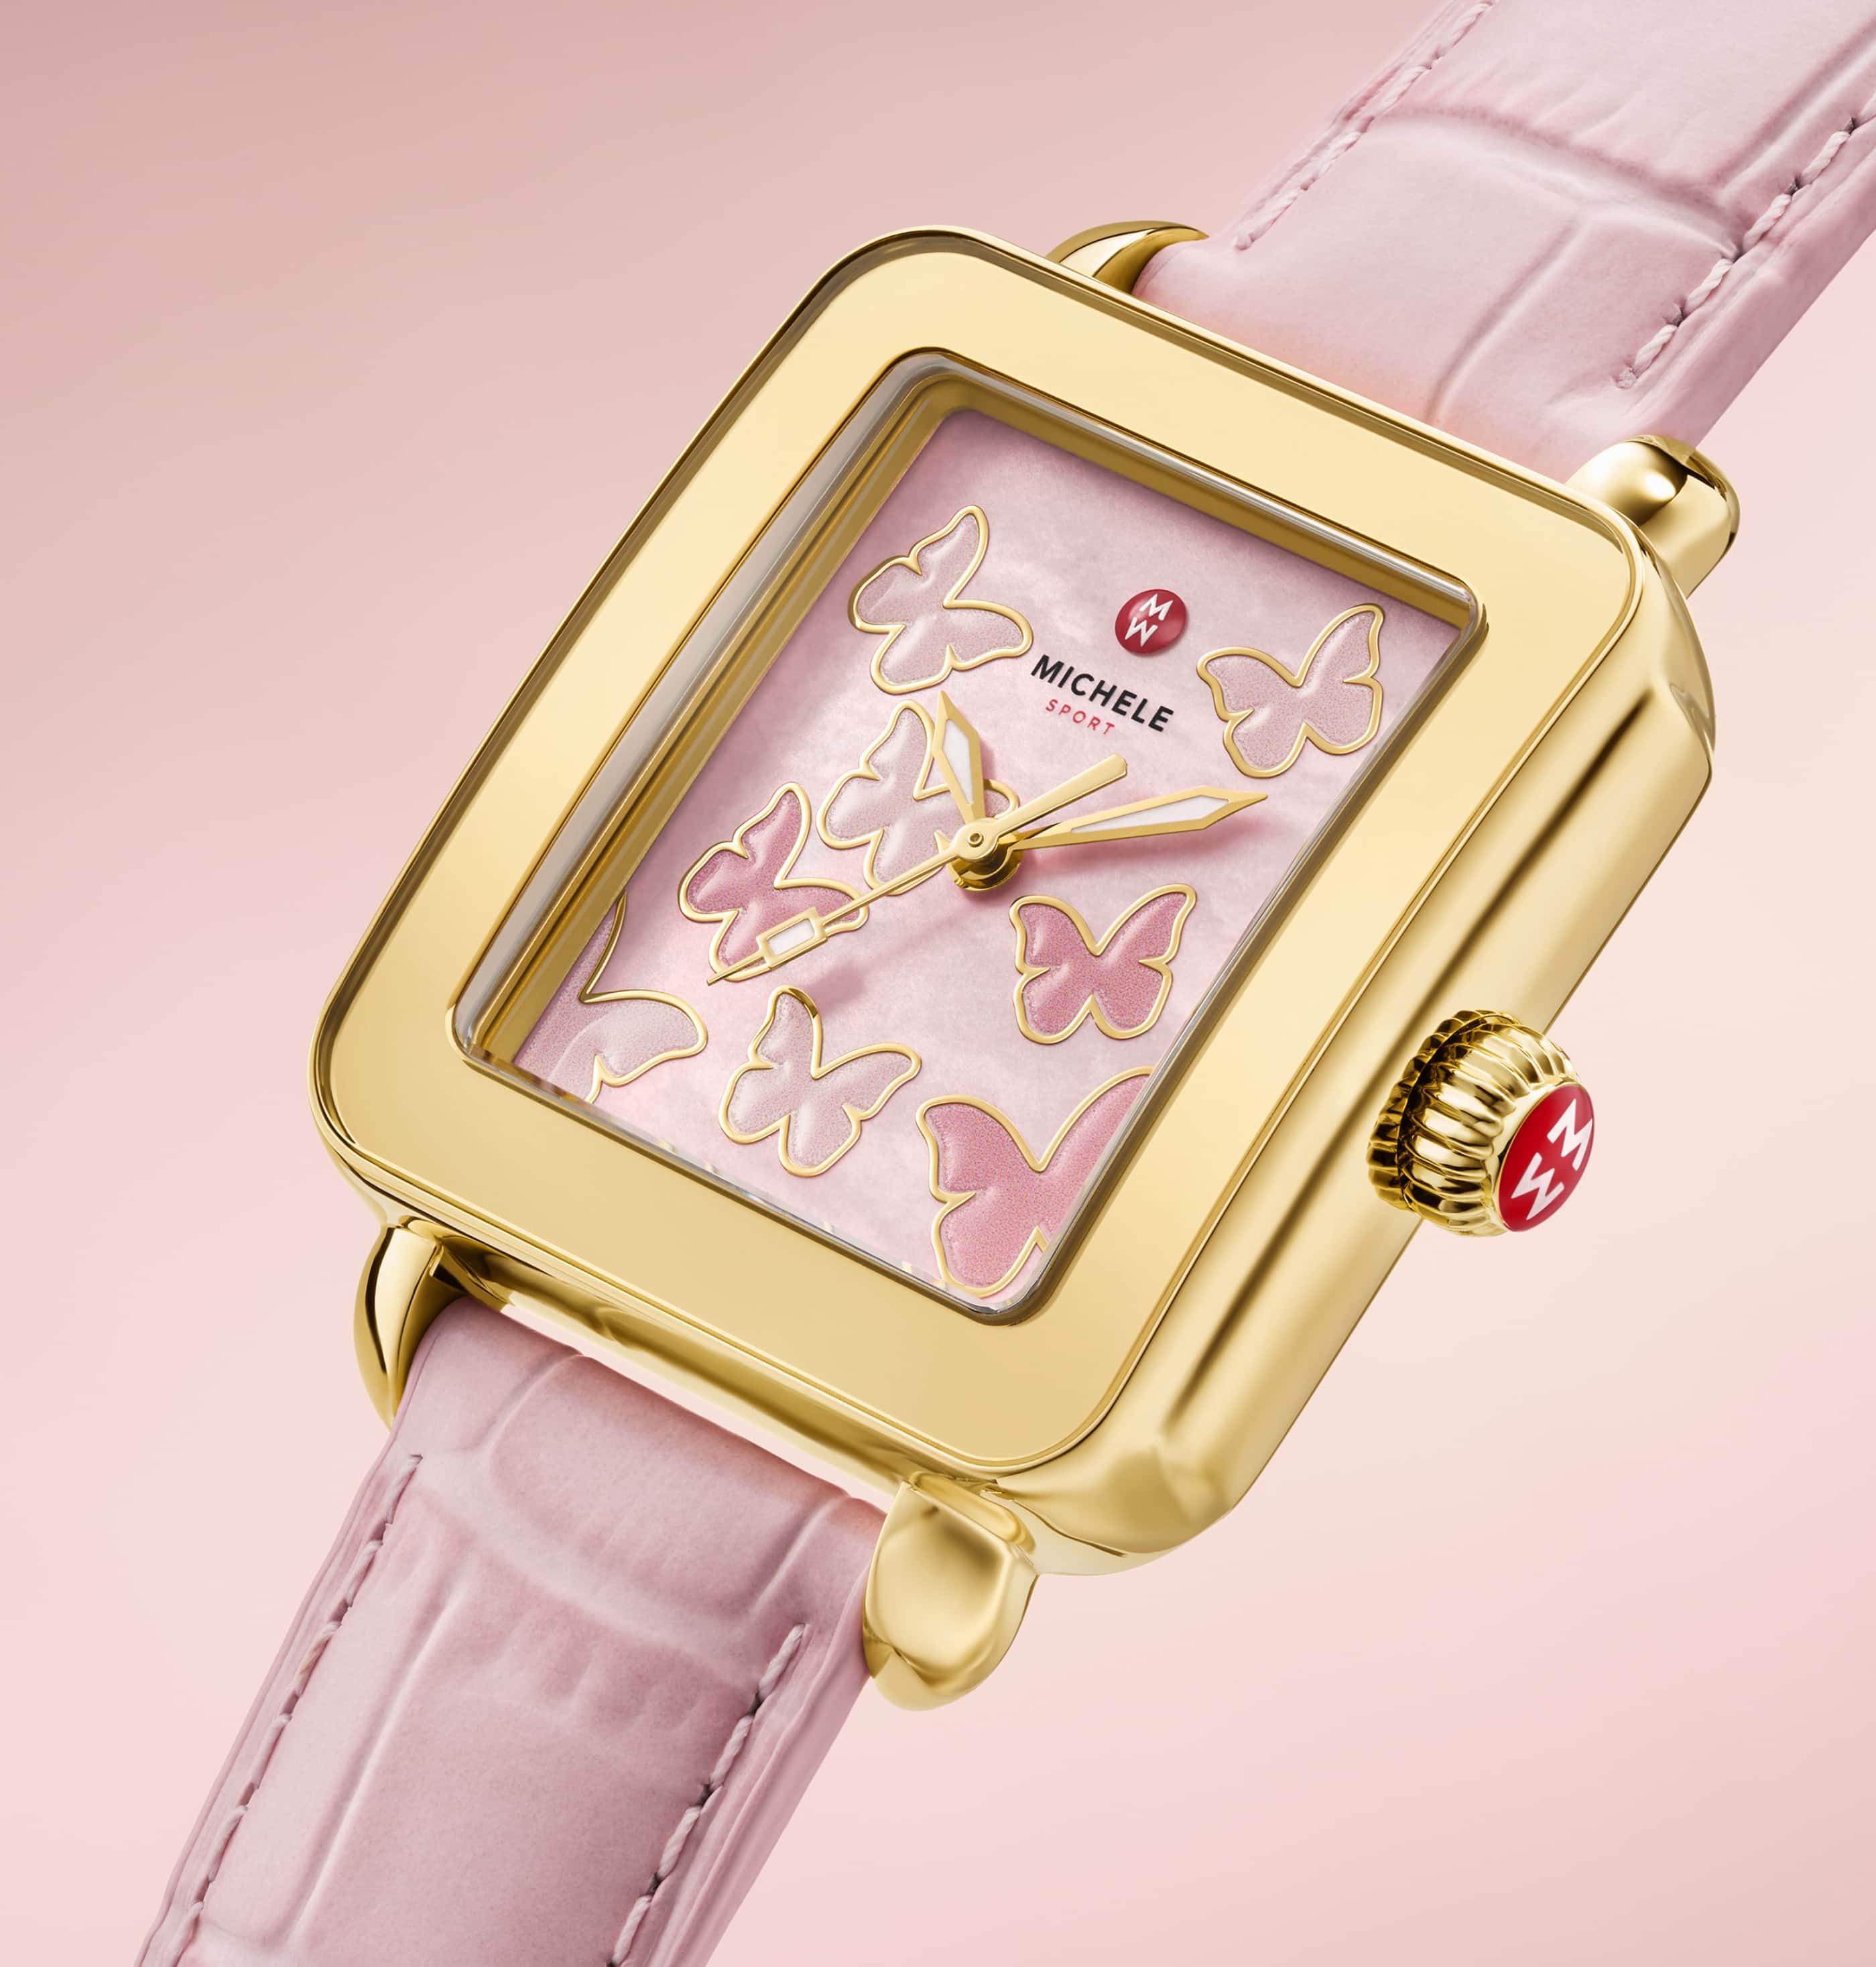 pink MICHELE deco sport watch with butterflies on the dial